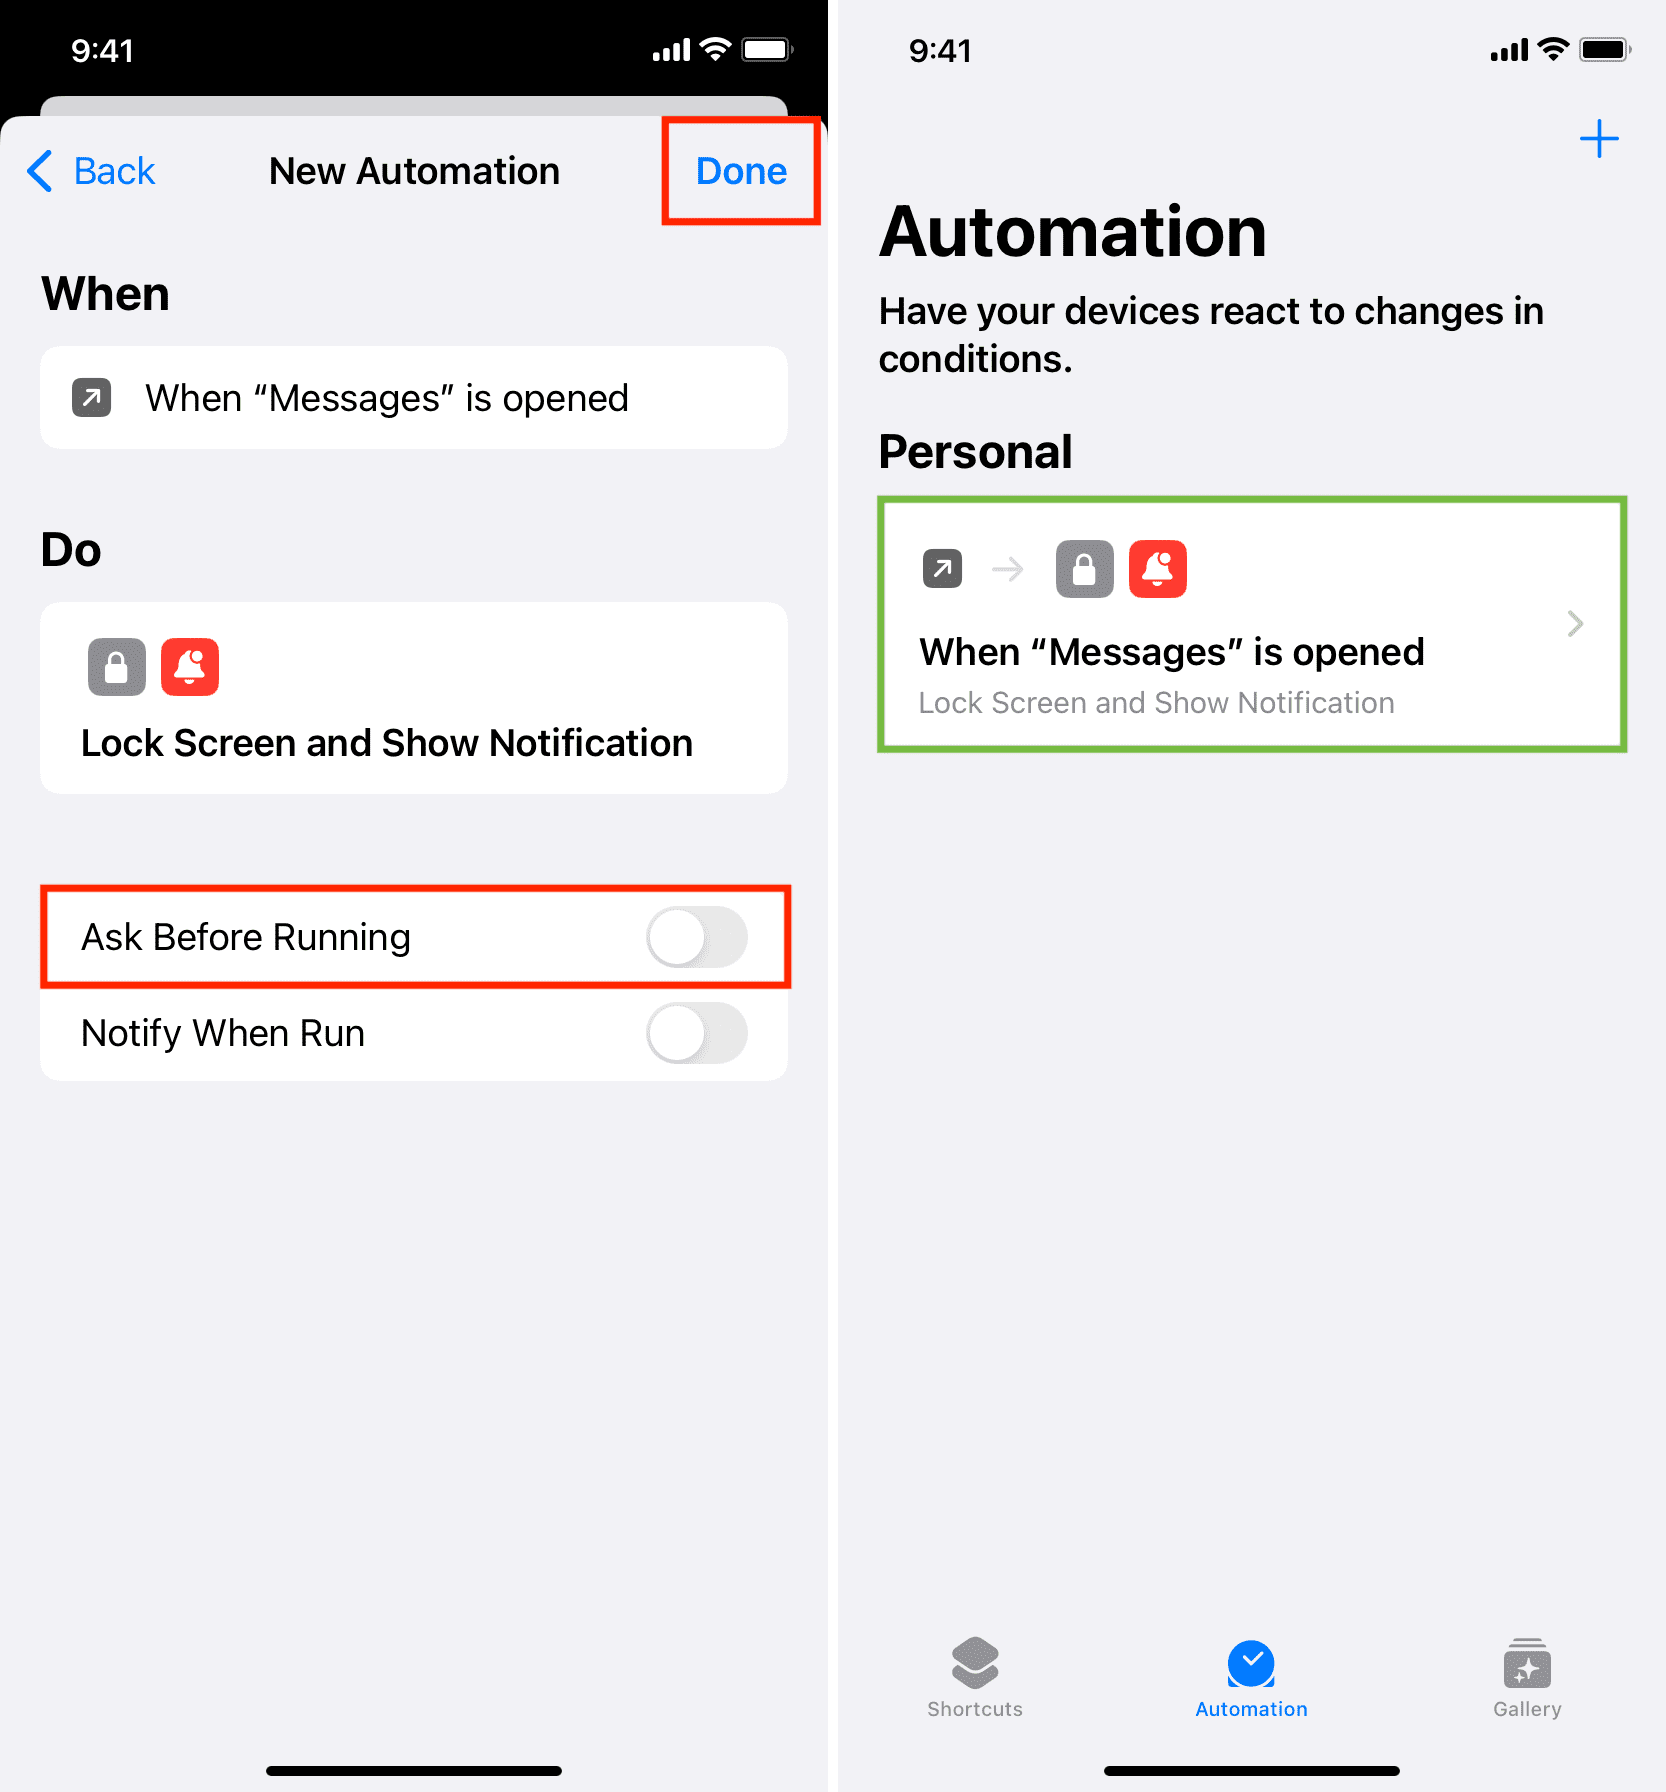 iOS automation that locks the iPhone and shows the Lock Screen when an app is opened